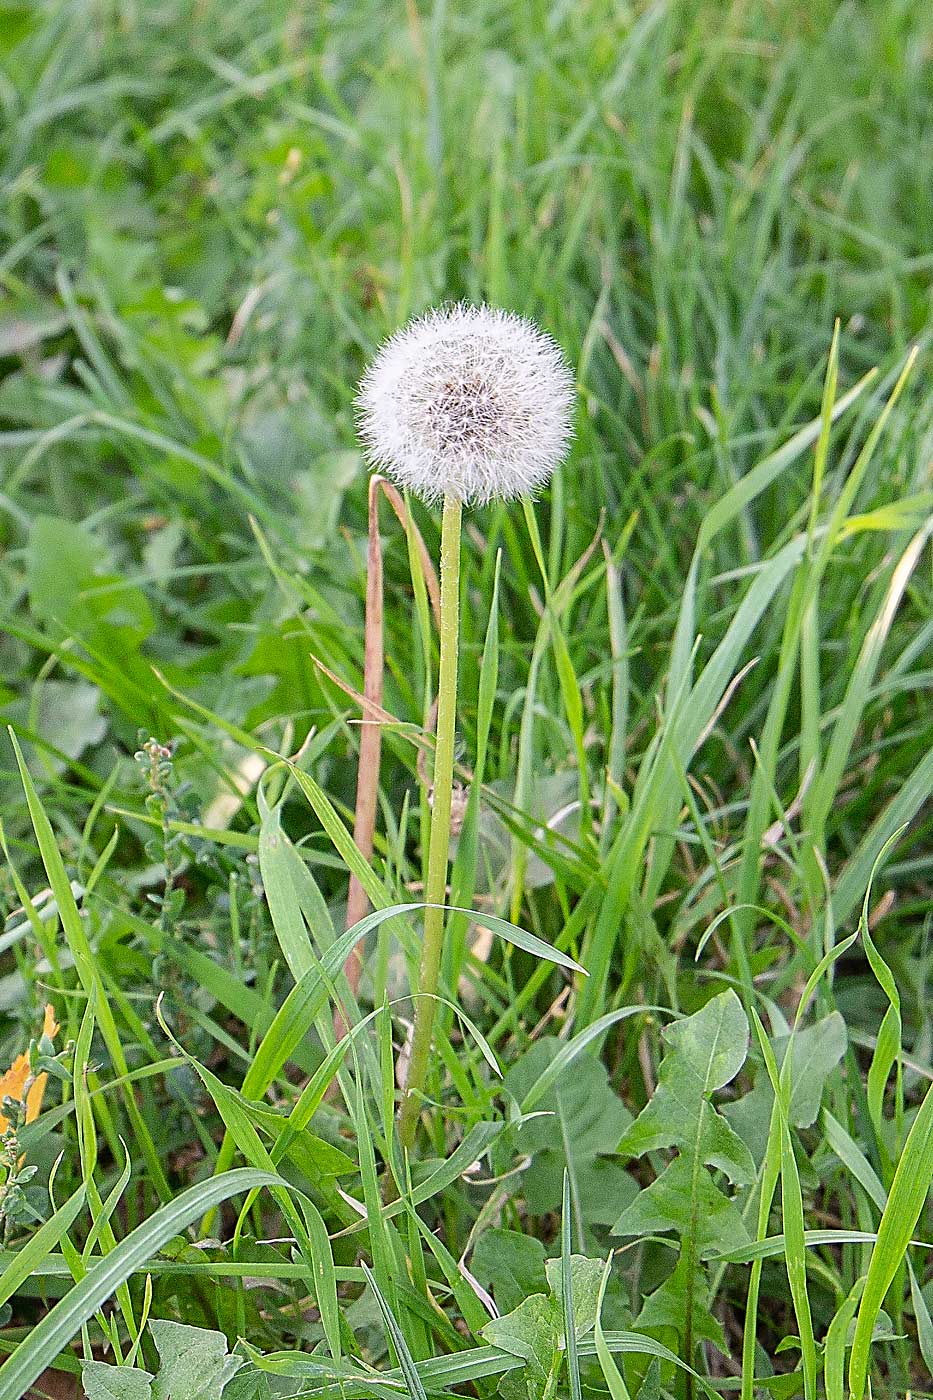 Dandelions and other perennial broadleaf weeds can be a reservoir of the X phytoplasma from season to season, which suggests that managing them may be an important part of X disease control. (Kate Prengaman/Good Fruit Grower)